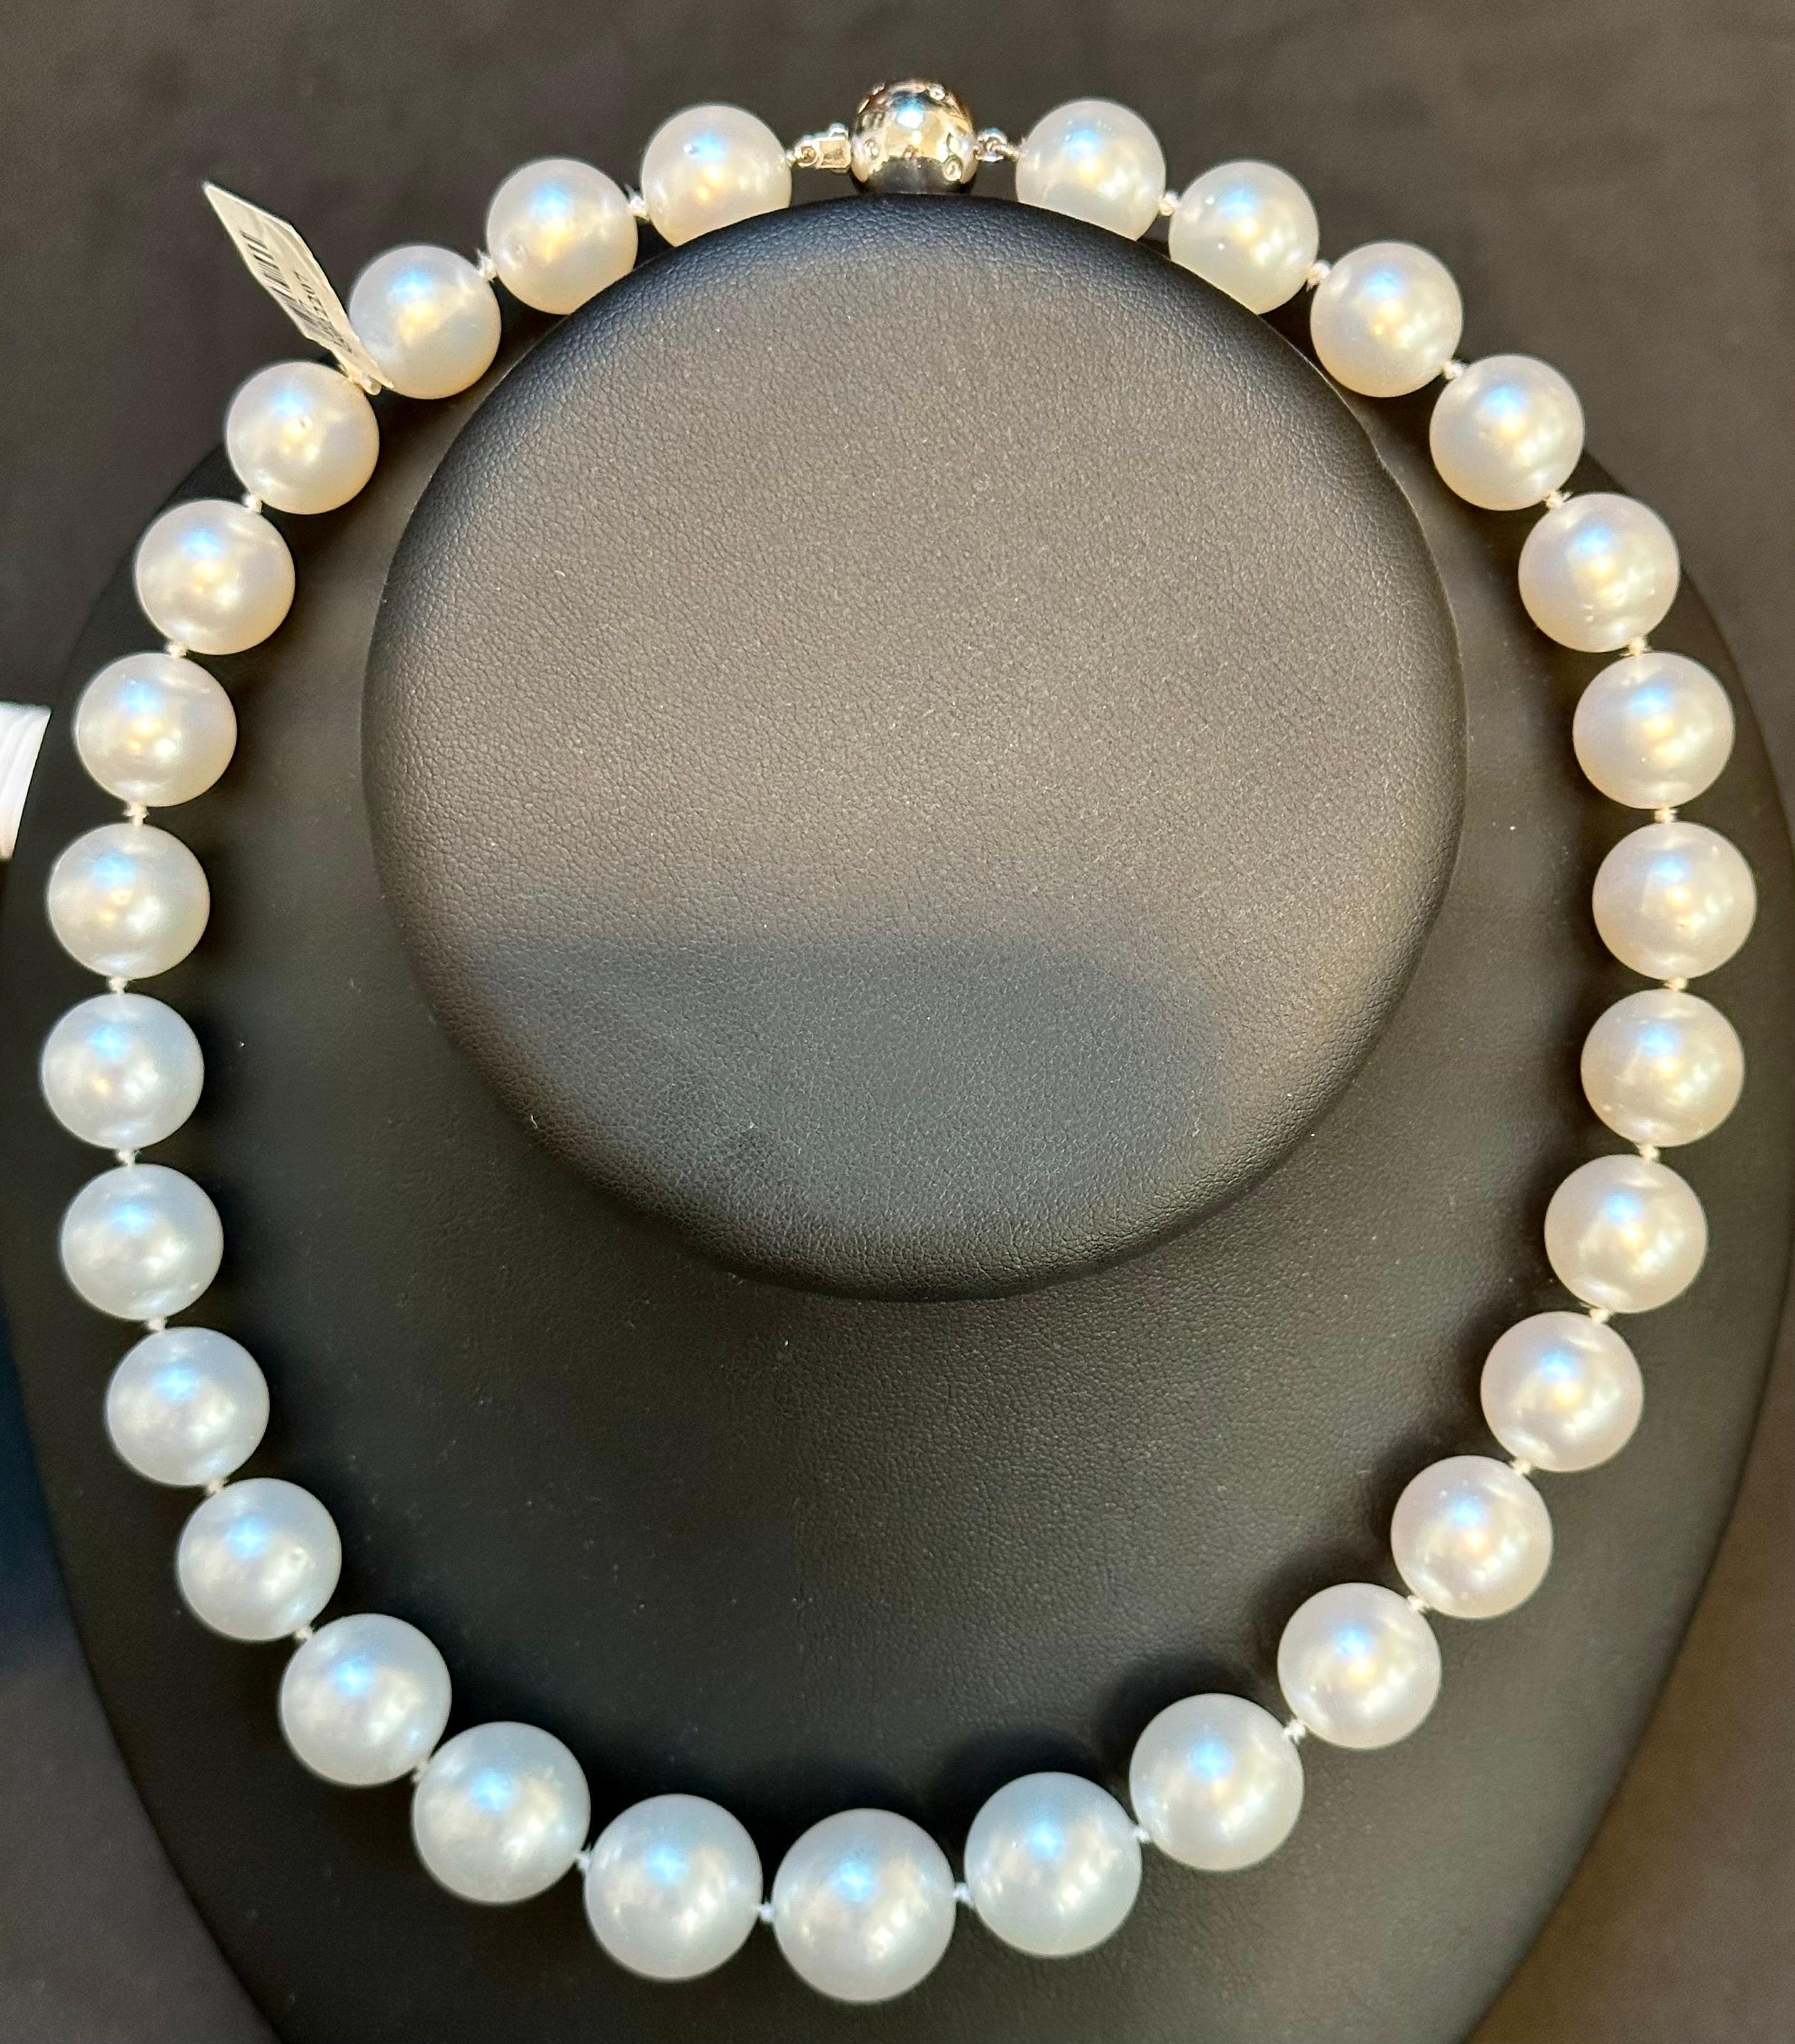 Women's 13-16.5mm White South Sea Round Pearl Necklace - AAA Quality, 29 Pieces +Diamond For Sale